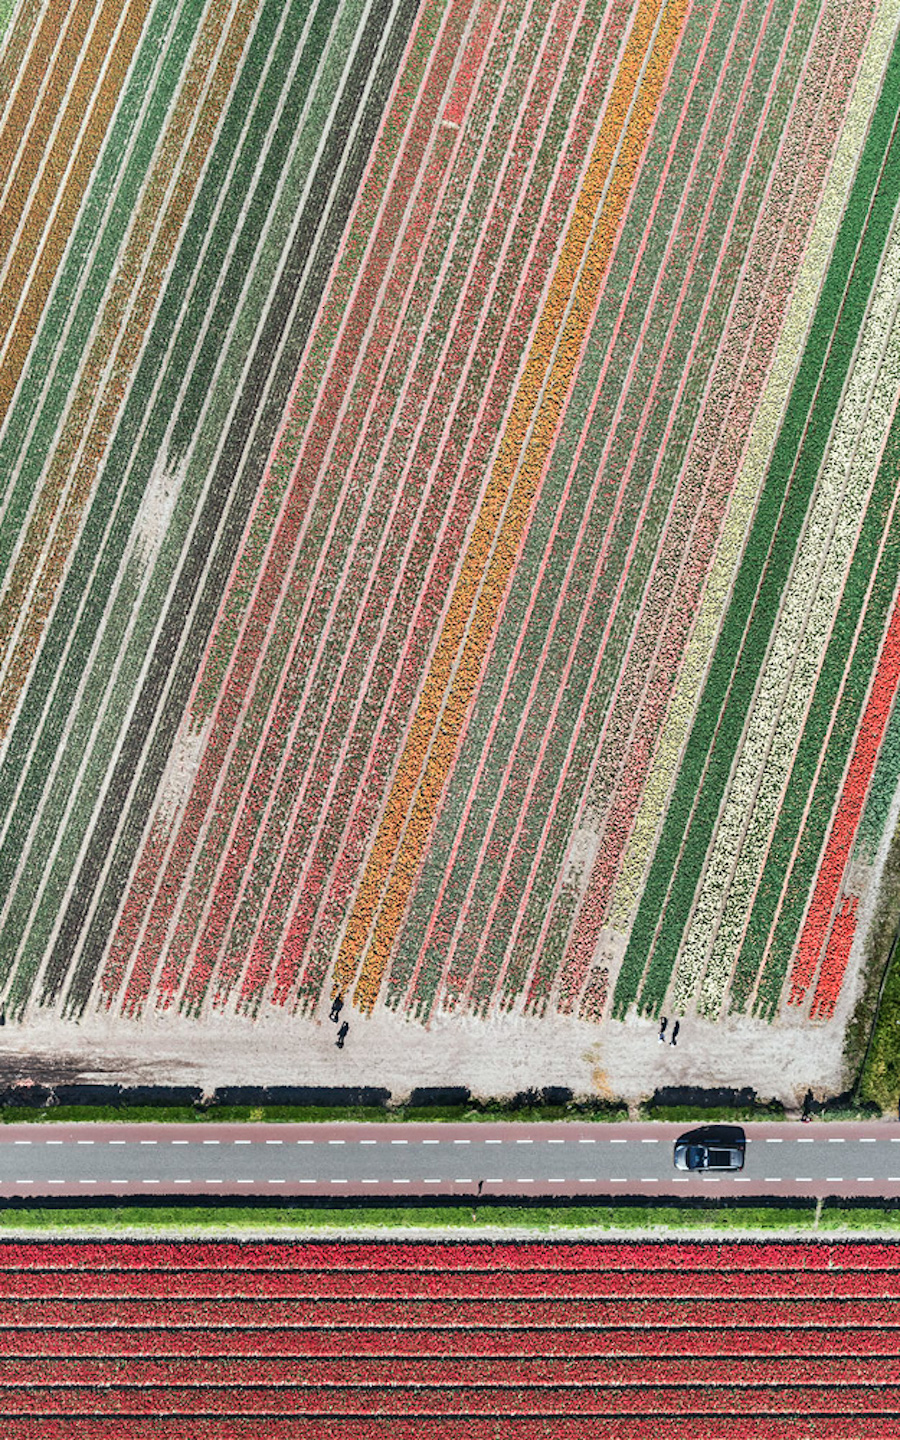 Multicolored Tulip Fields From the Air18